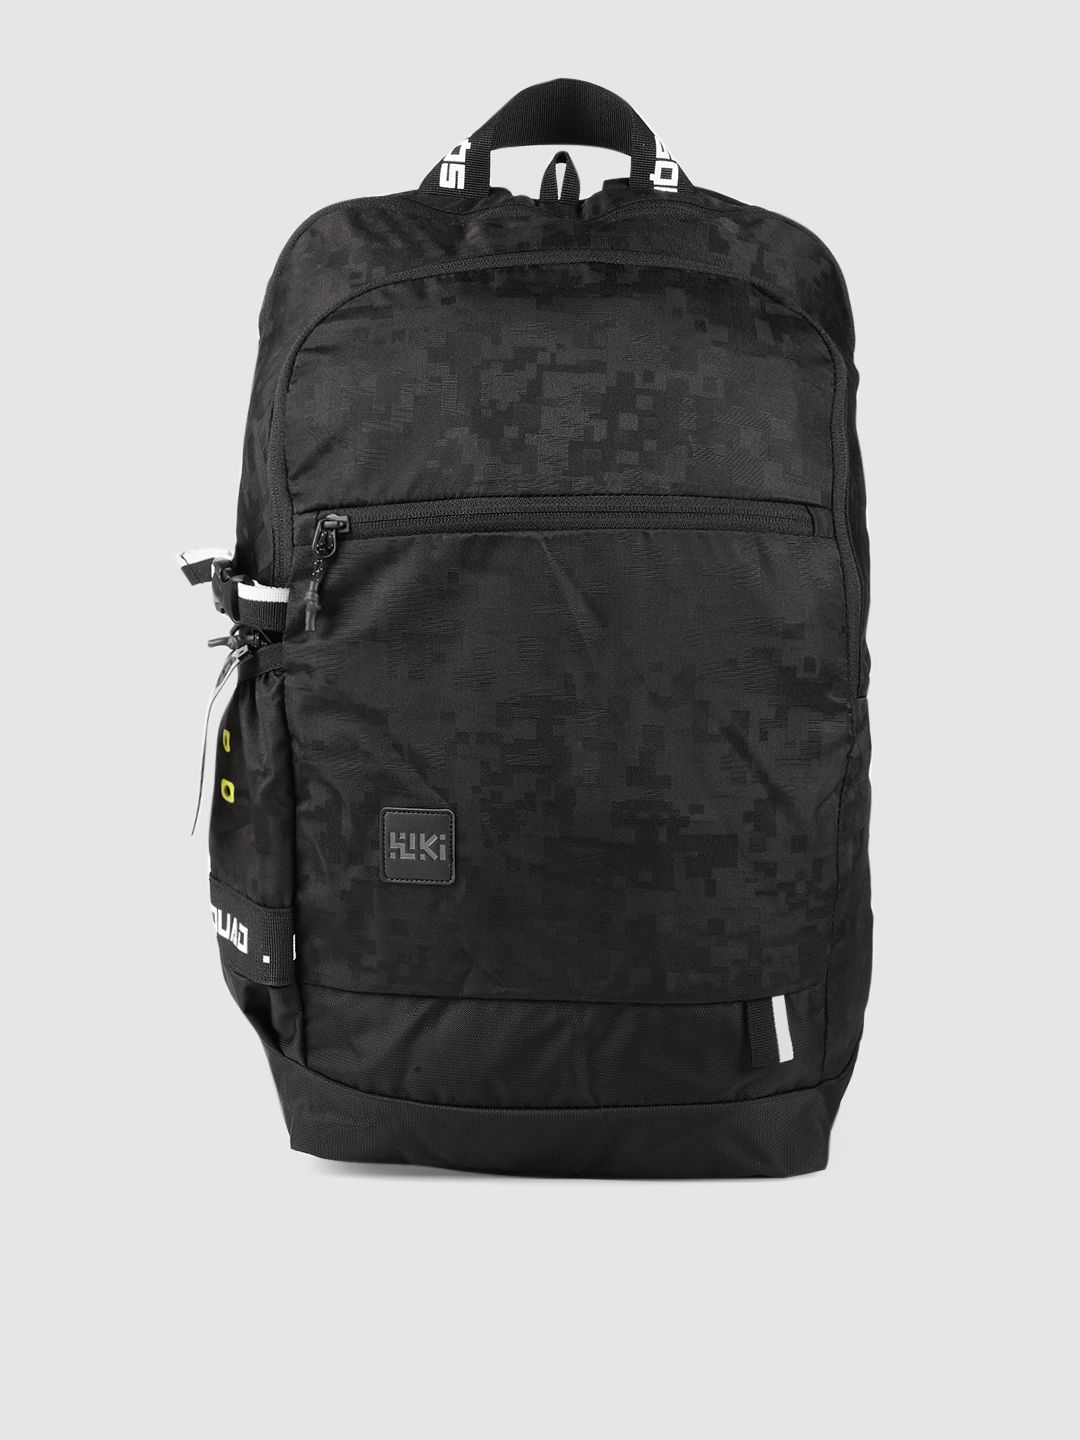 Wildcraft Unisex Black WIKI SQUAD 1 Jacq Backpack Price in India